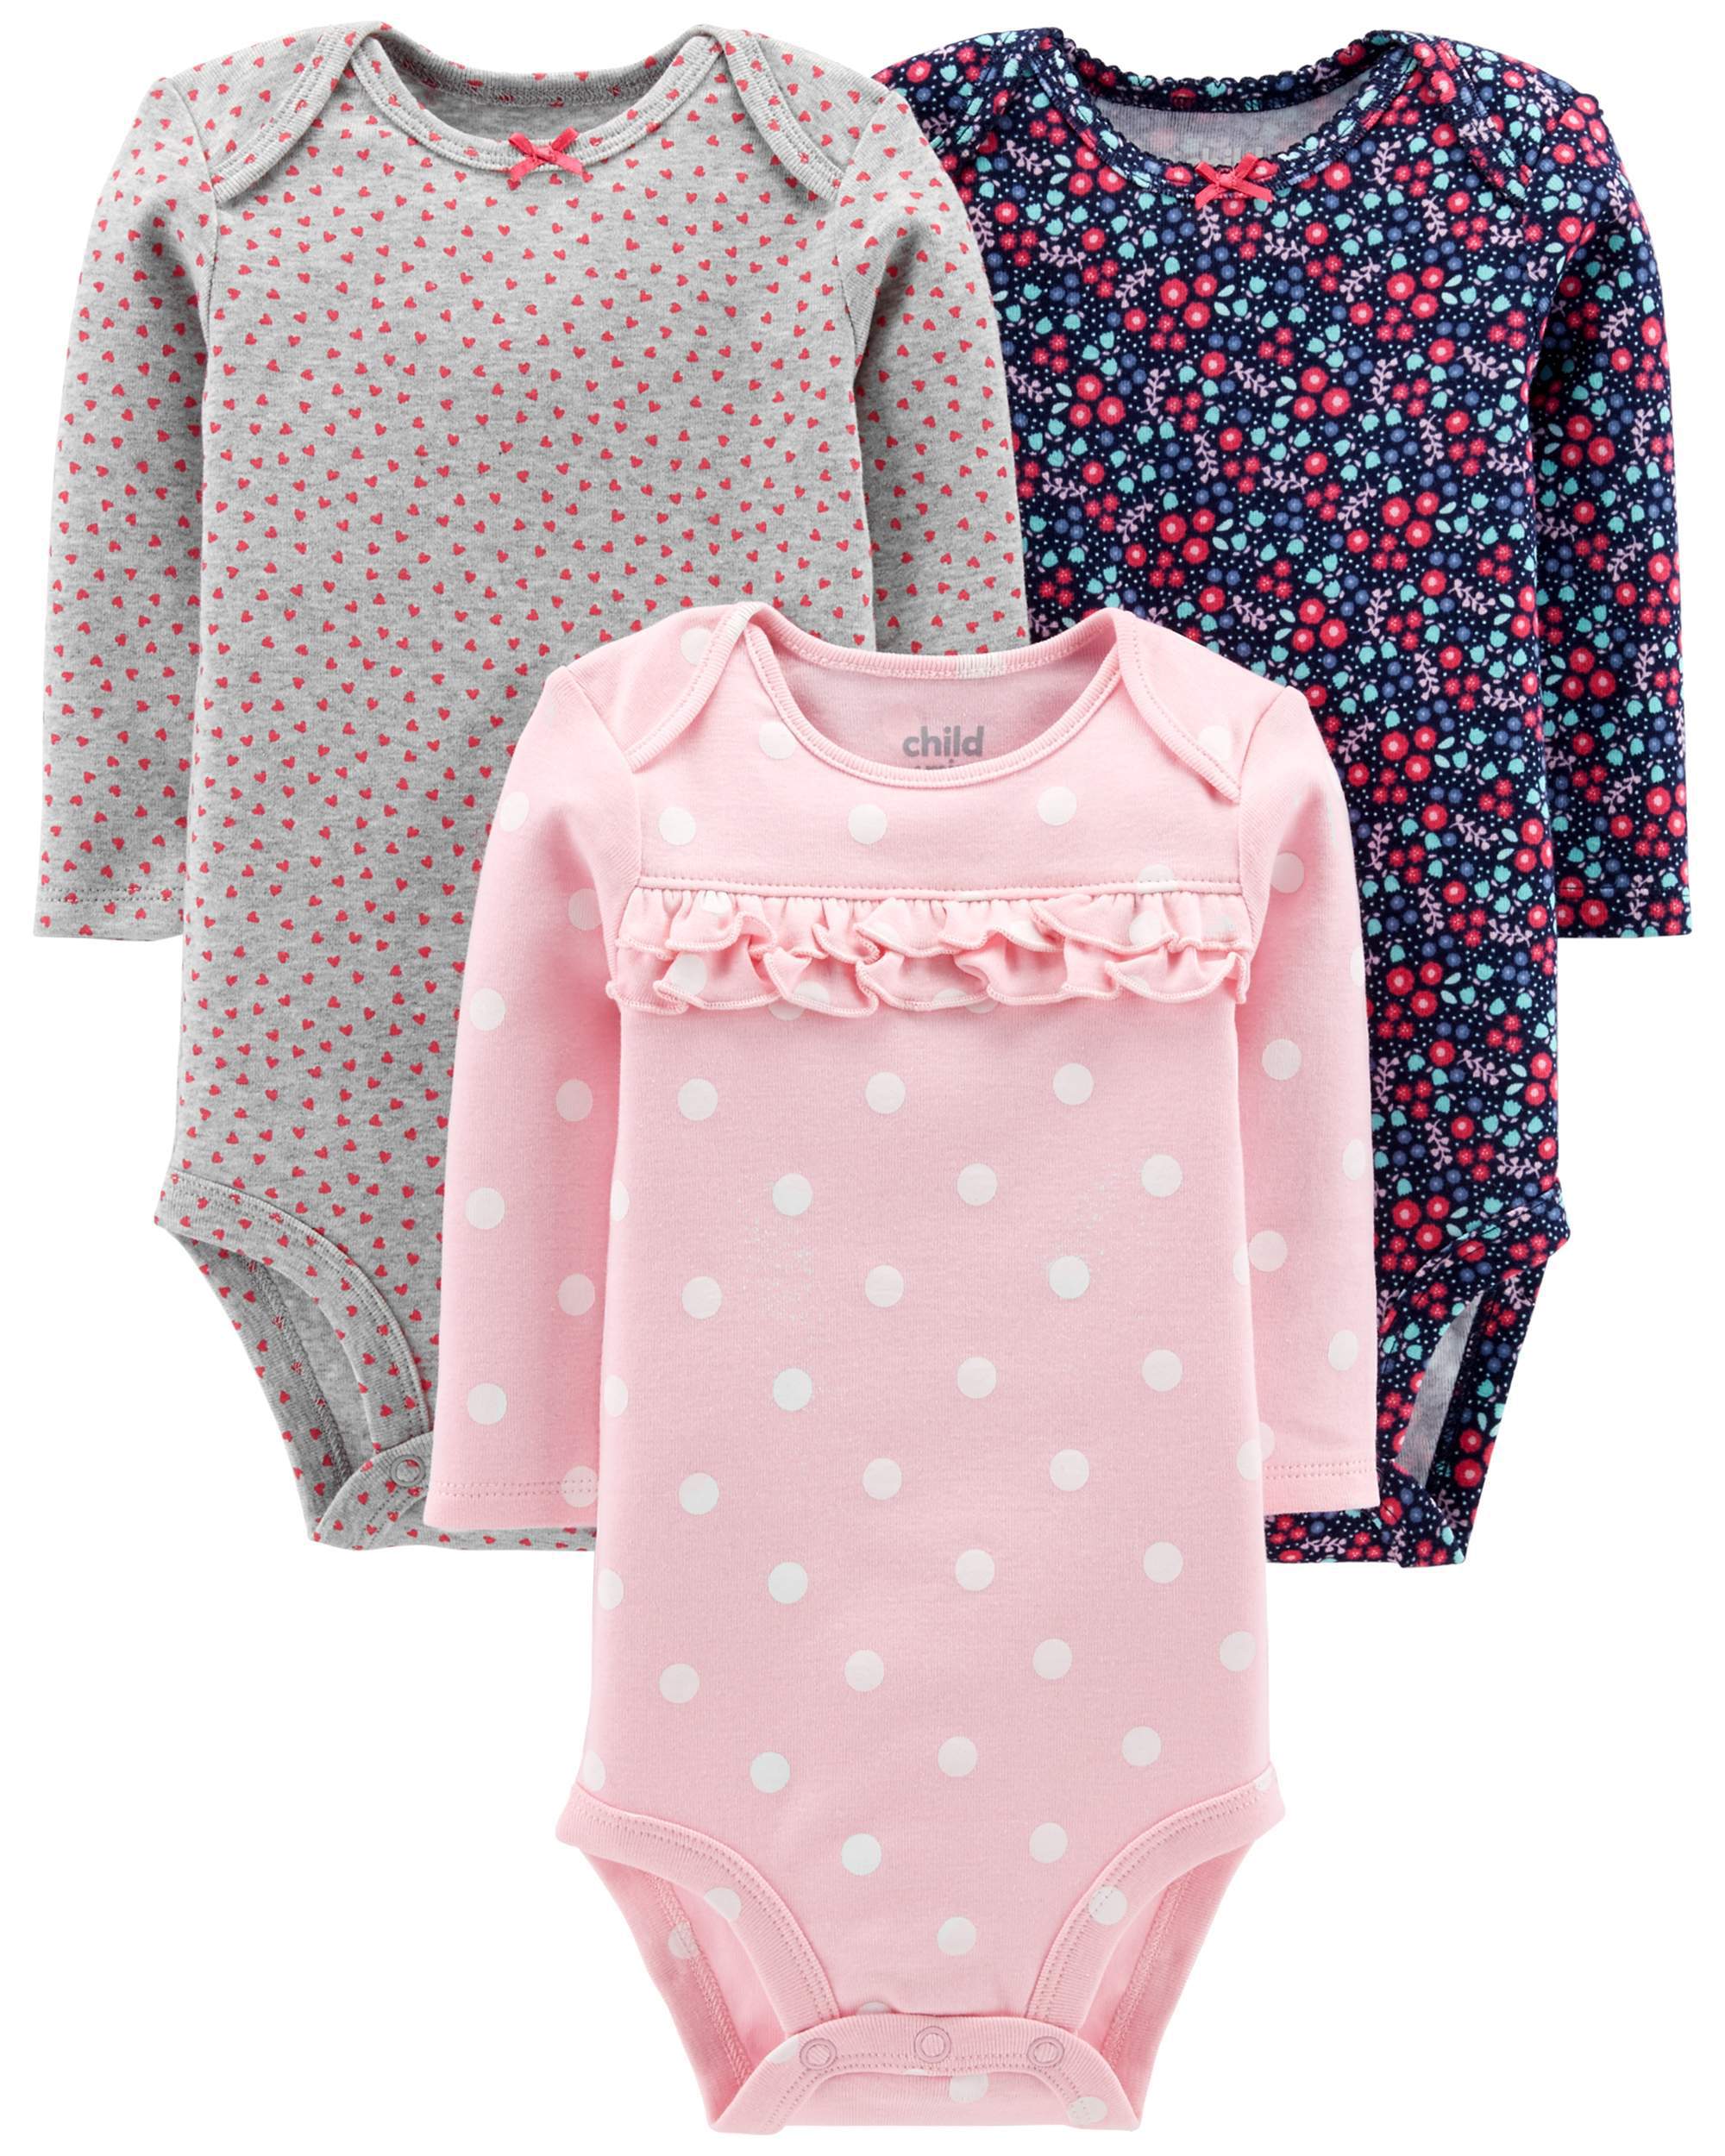 Carter's Child of Mine Long Sleeve Bodysuits, 3-pack (Baby Girls) - image 1 of 3